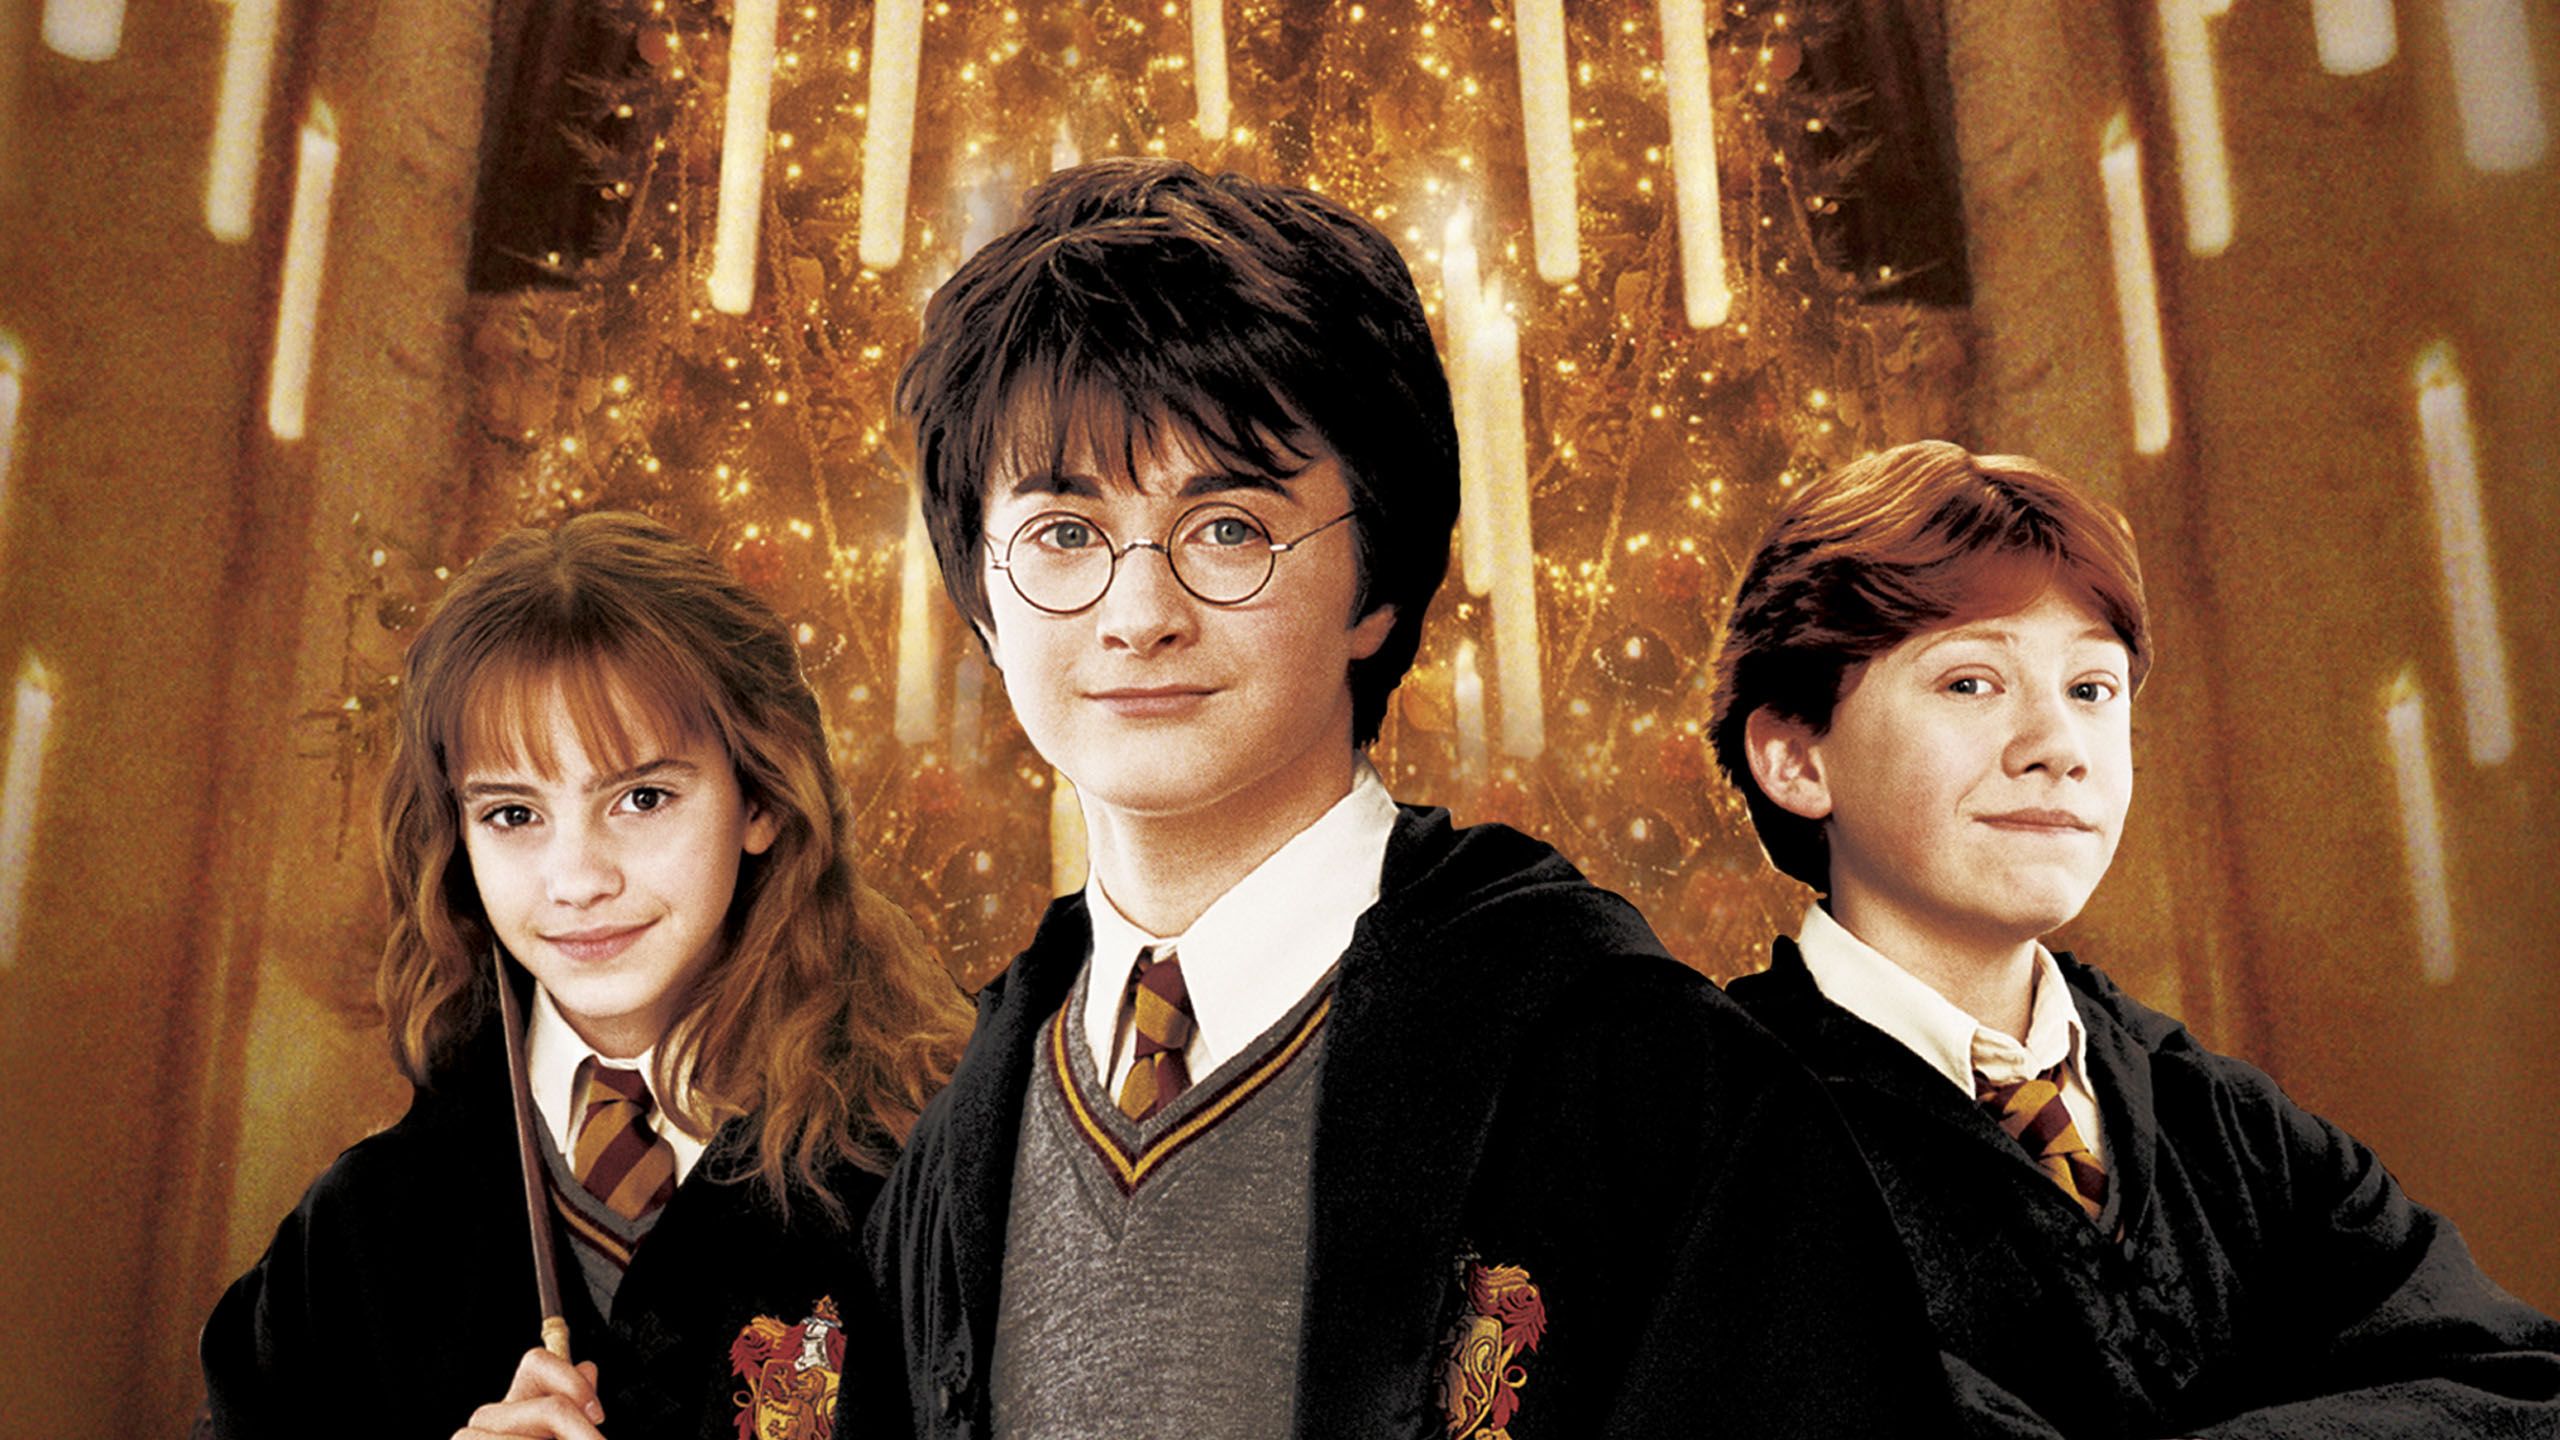 Harry potter and the chamber of secrets full movie hd Harry Potter And The Chamber Of Secrets Full Movie Movies Anywhere